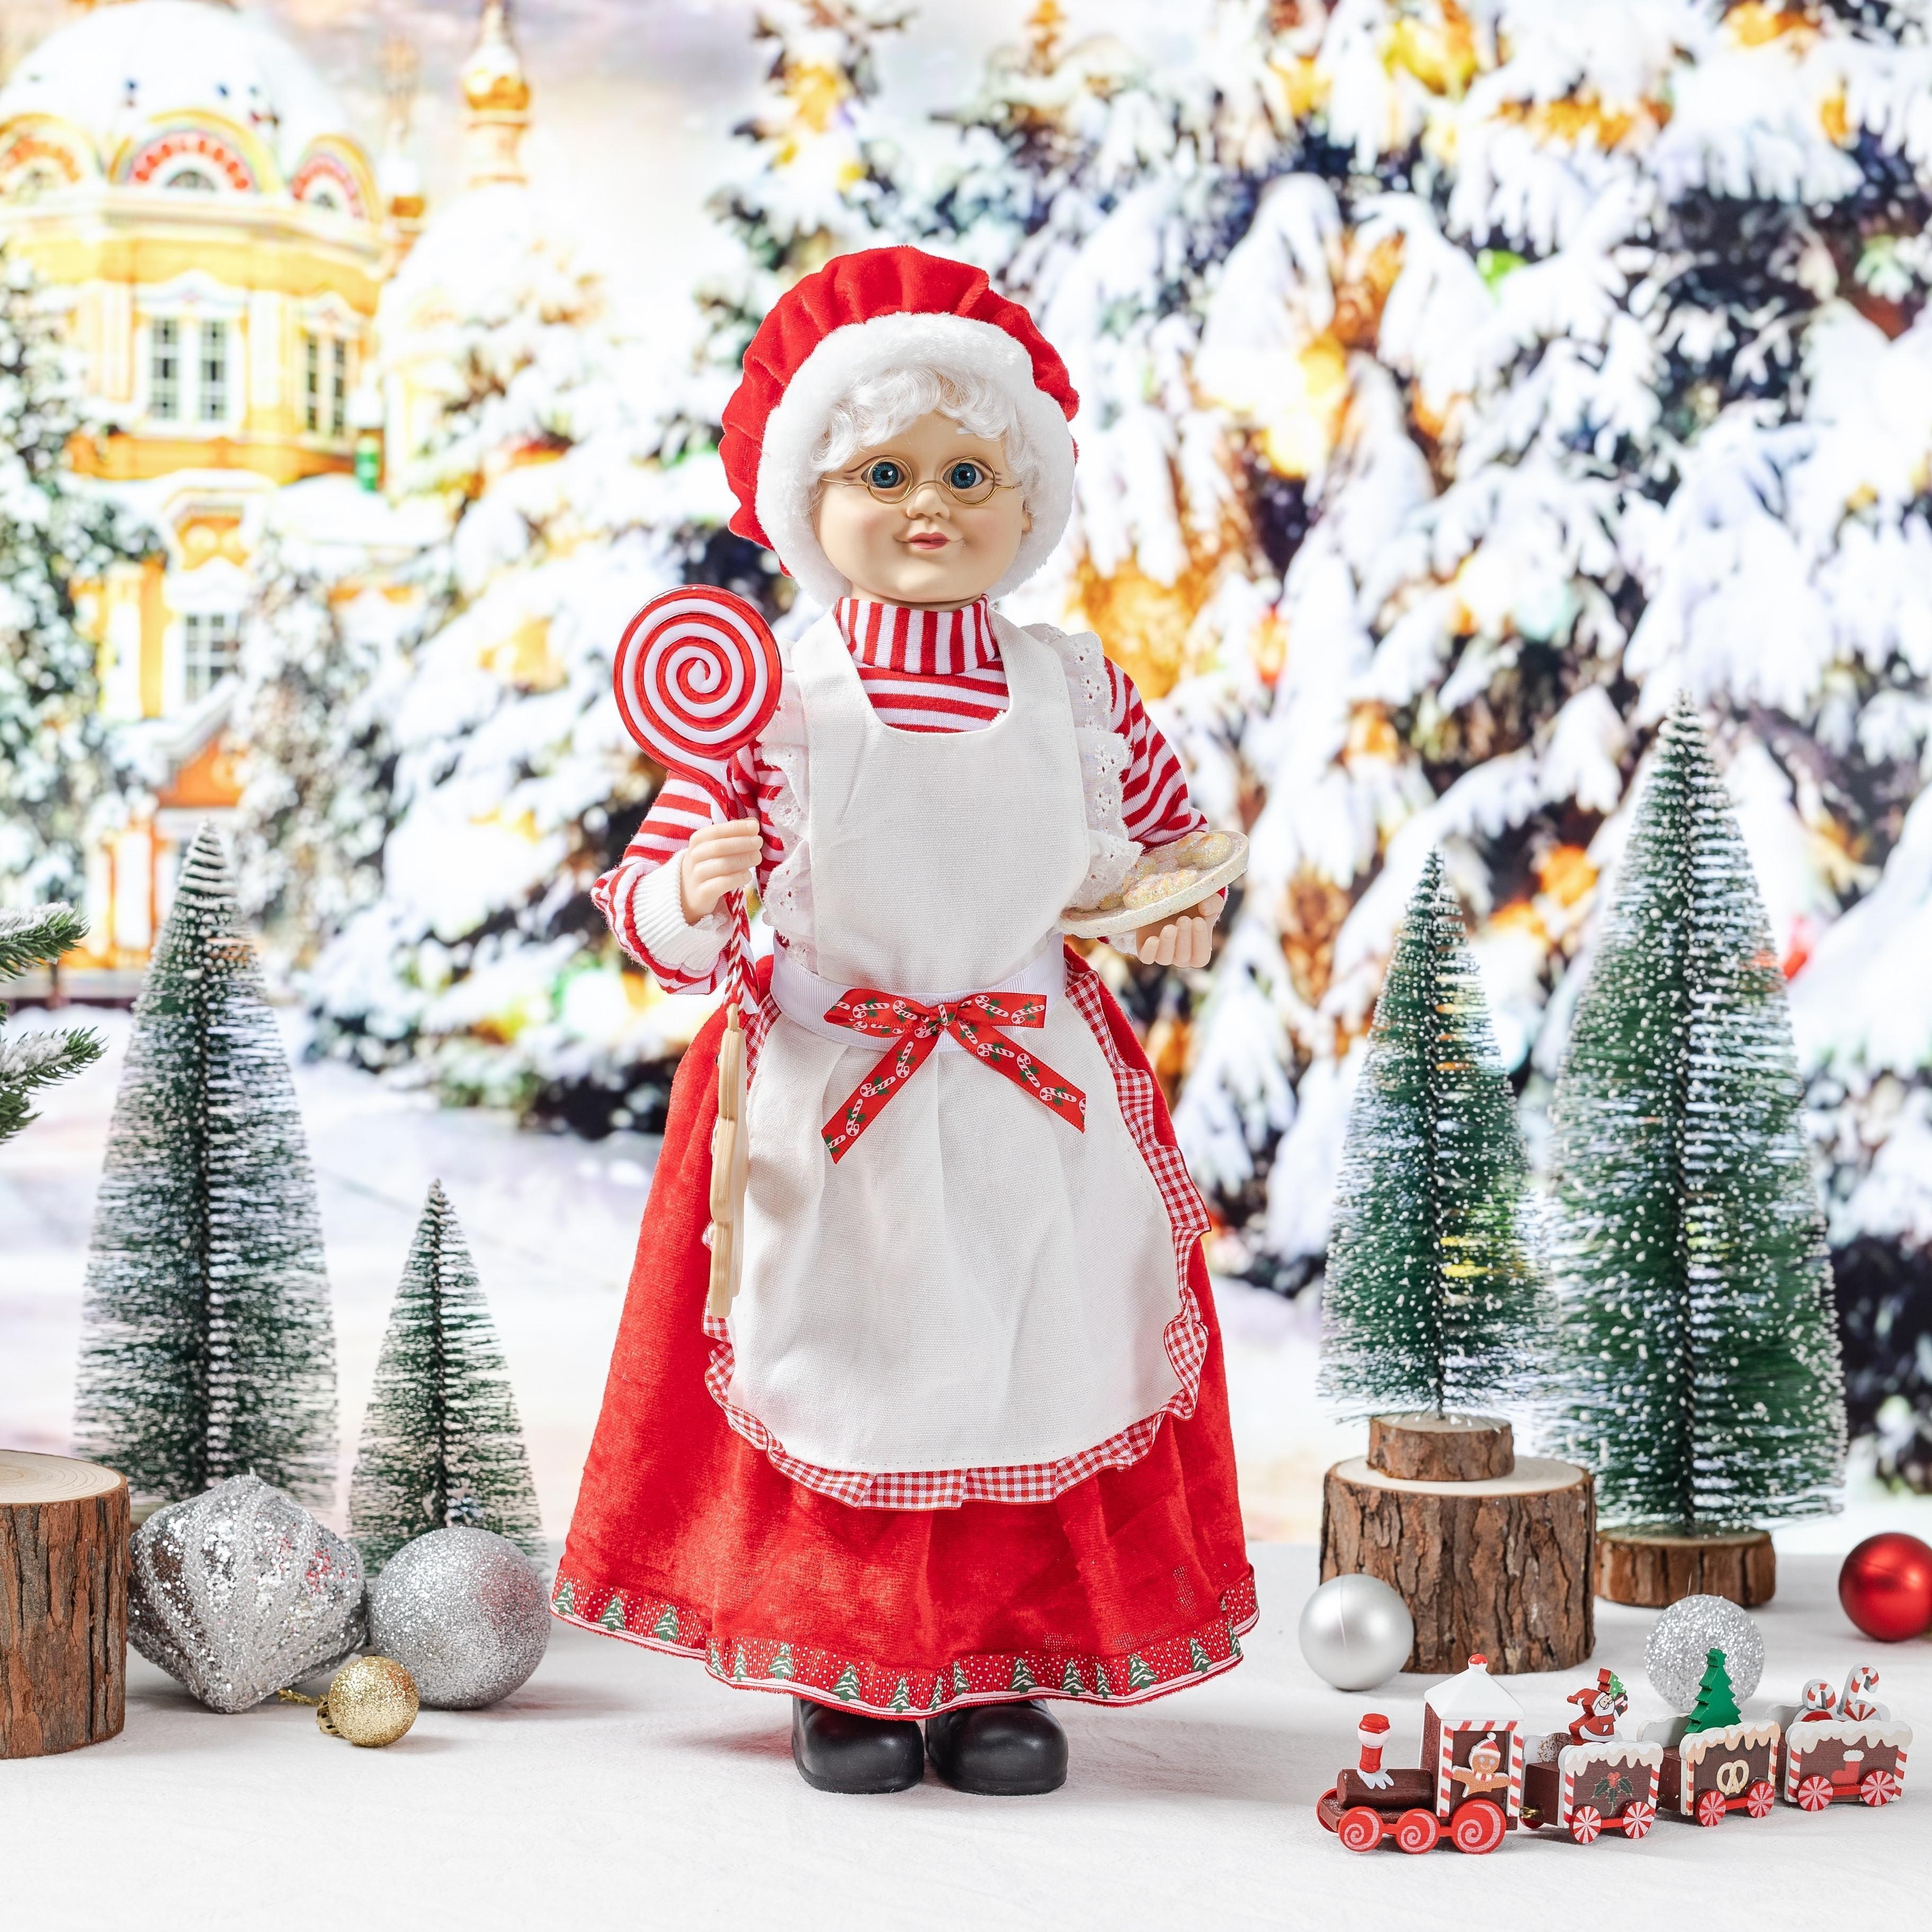 1pc Candy Kitchen Mrs. Claus Decoration, Multi-color Christmas Classic Red Stripe Chef Mrs. Claus Figurines Doll Accessories Ornament, Gift Standing Statue Figure ,Home Xmas Decor Christmas Decoration, Xmas Decoration Decor Christmas Gift